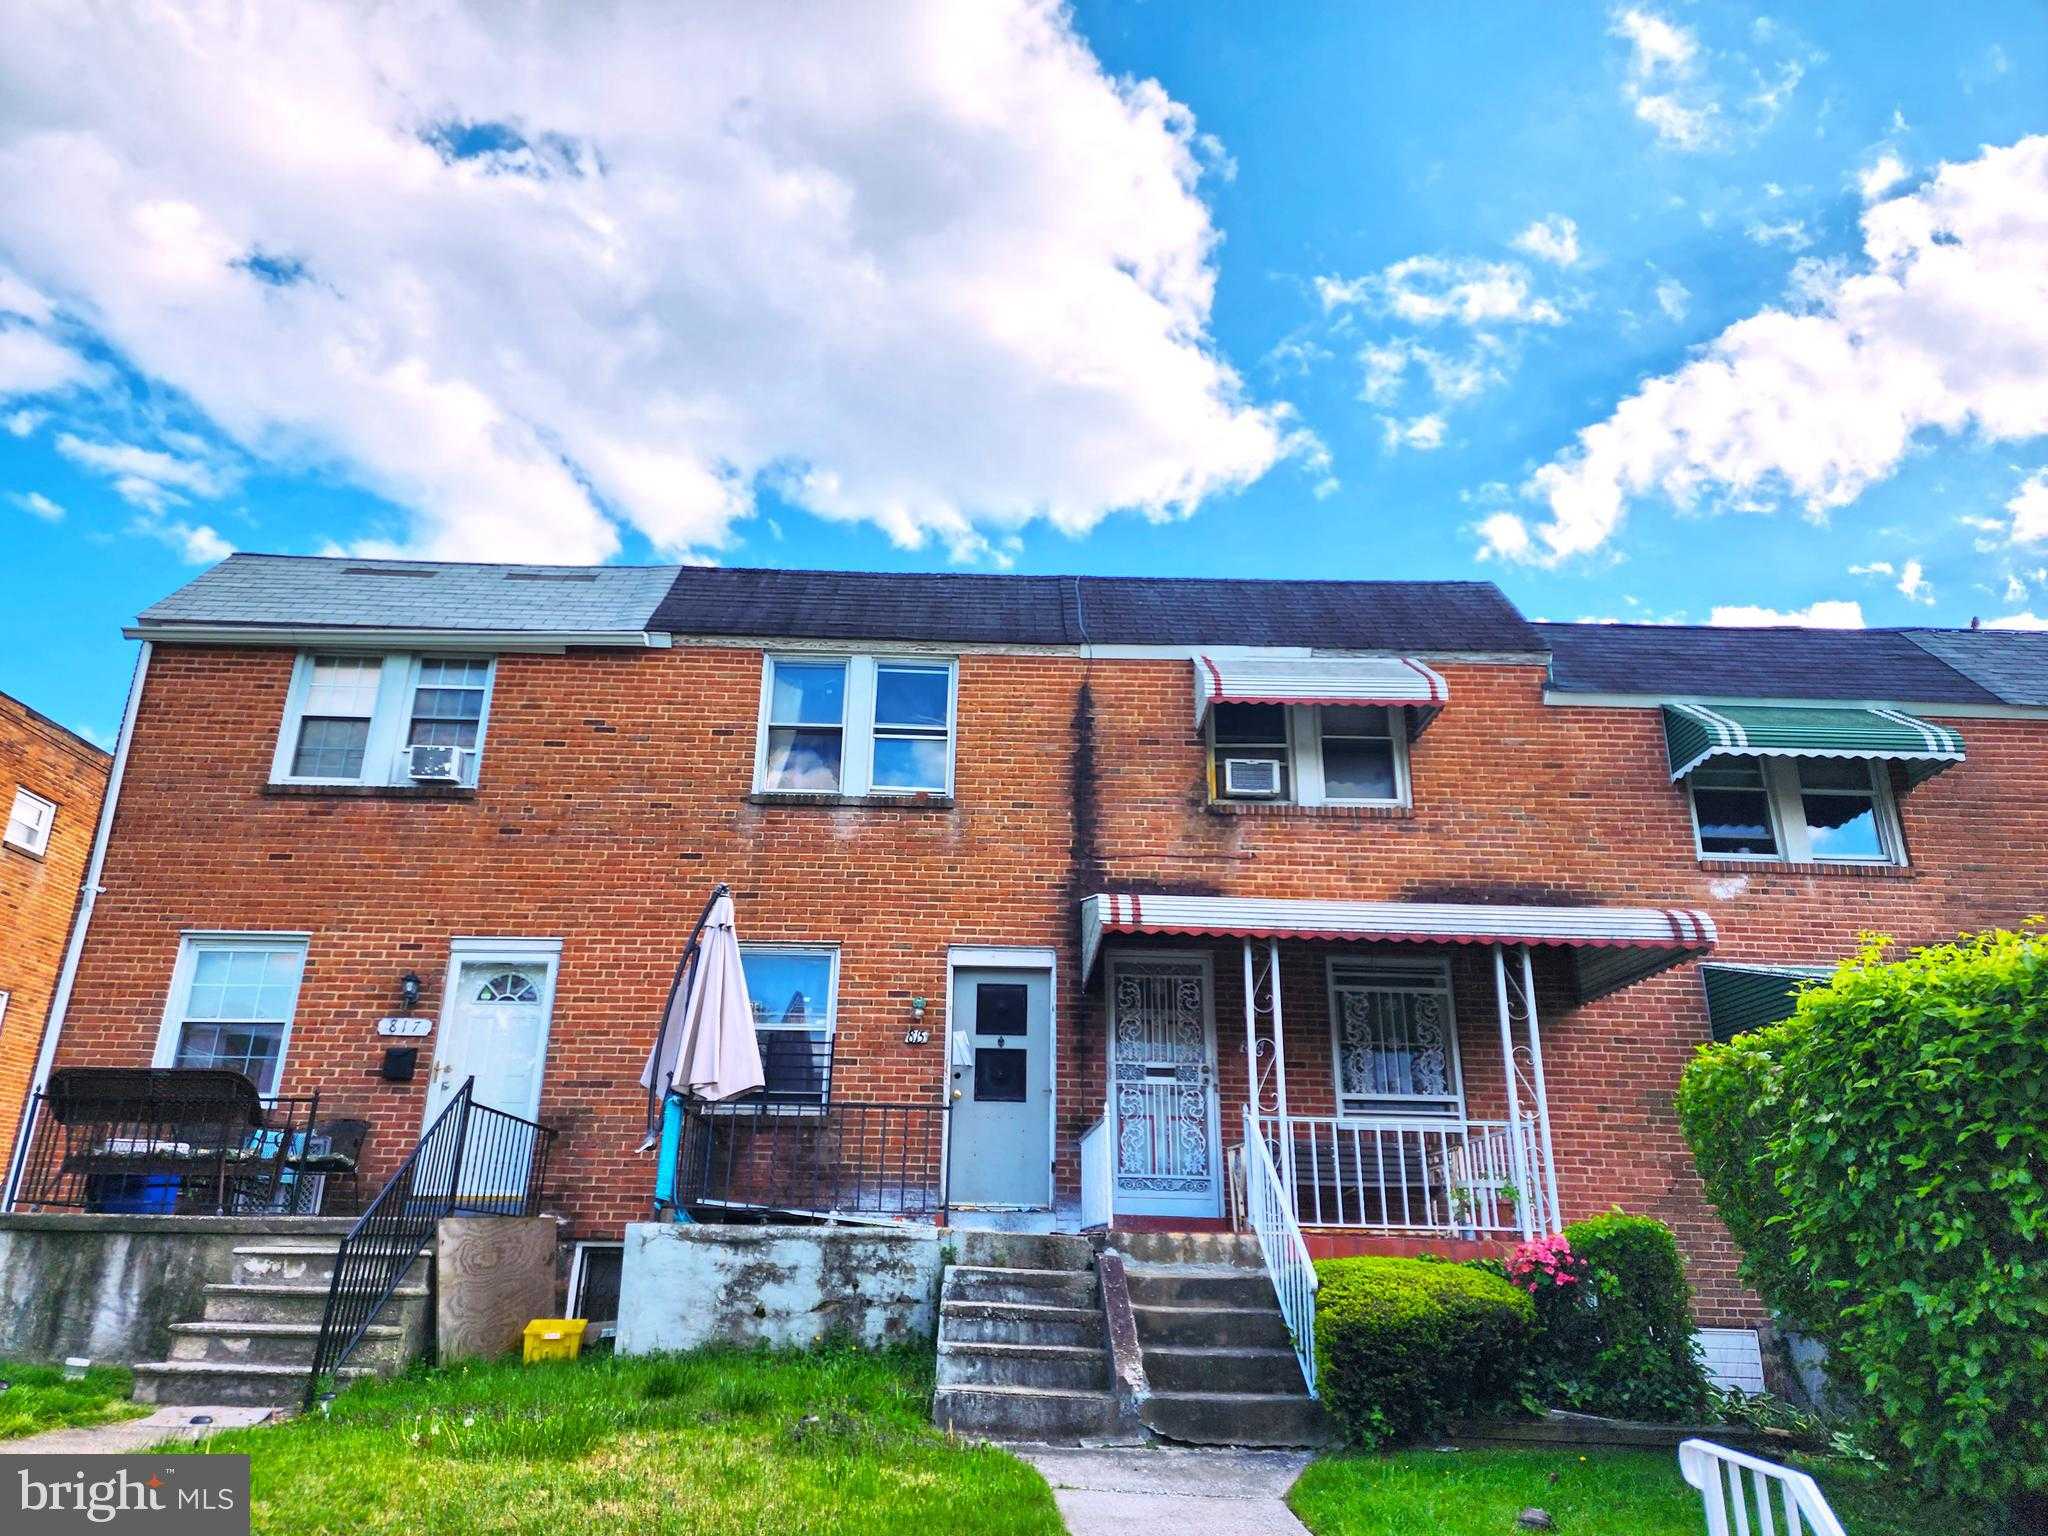 View BALTIMORE, MD 21212 townhome